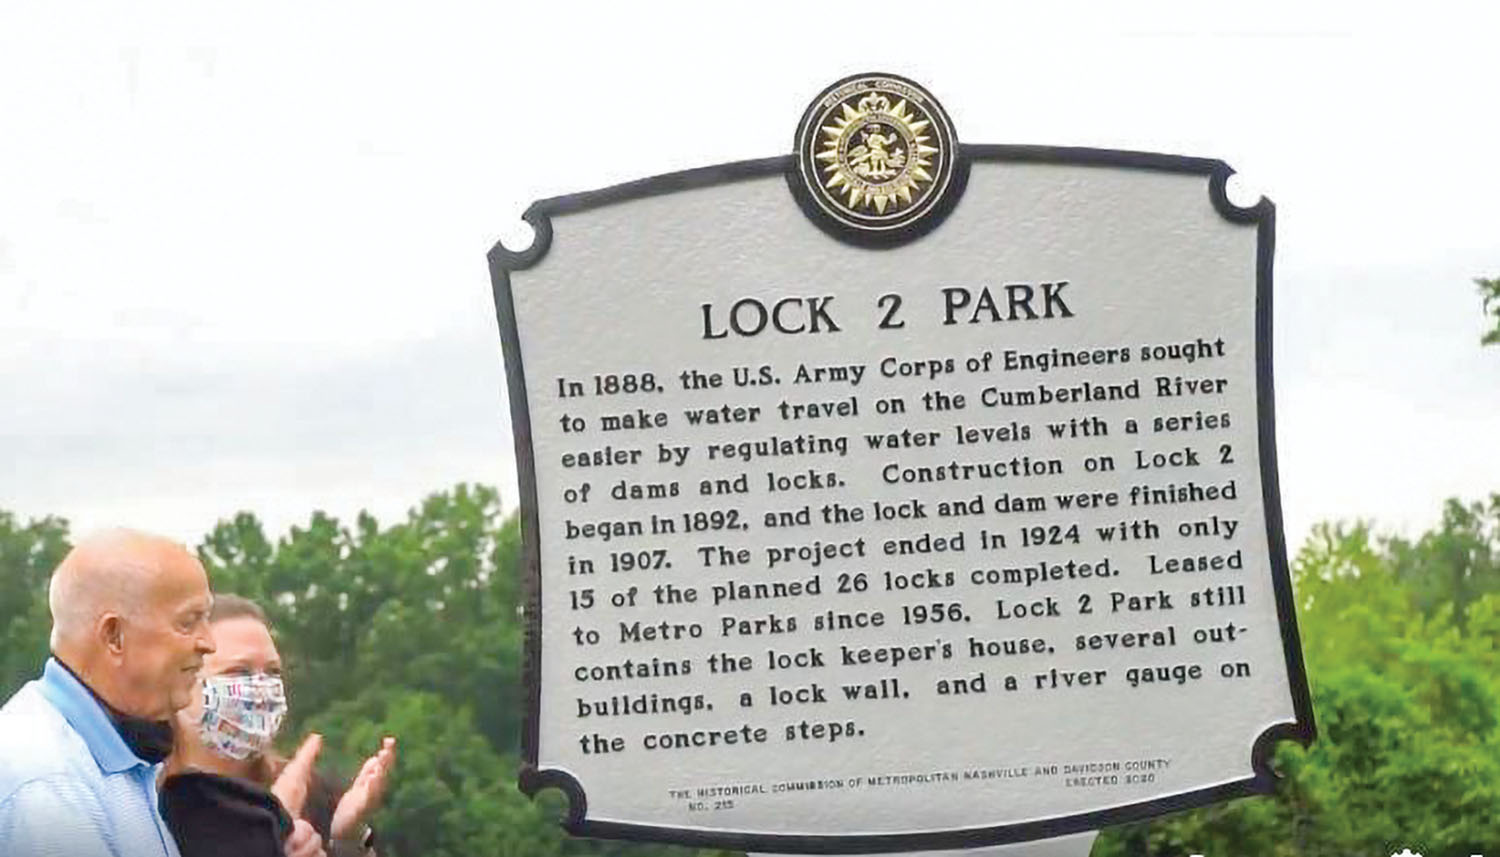 Bill Holman smiles and Jessica Reeves of the Metro Historical Commission claps moments after the historical marker at Lock 2 Park is unveiled. (Screenshot from Nashville Engineer District video)